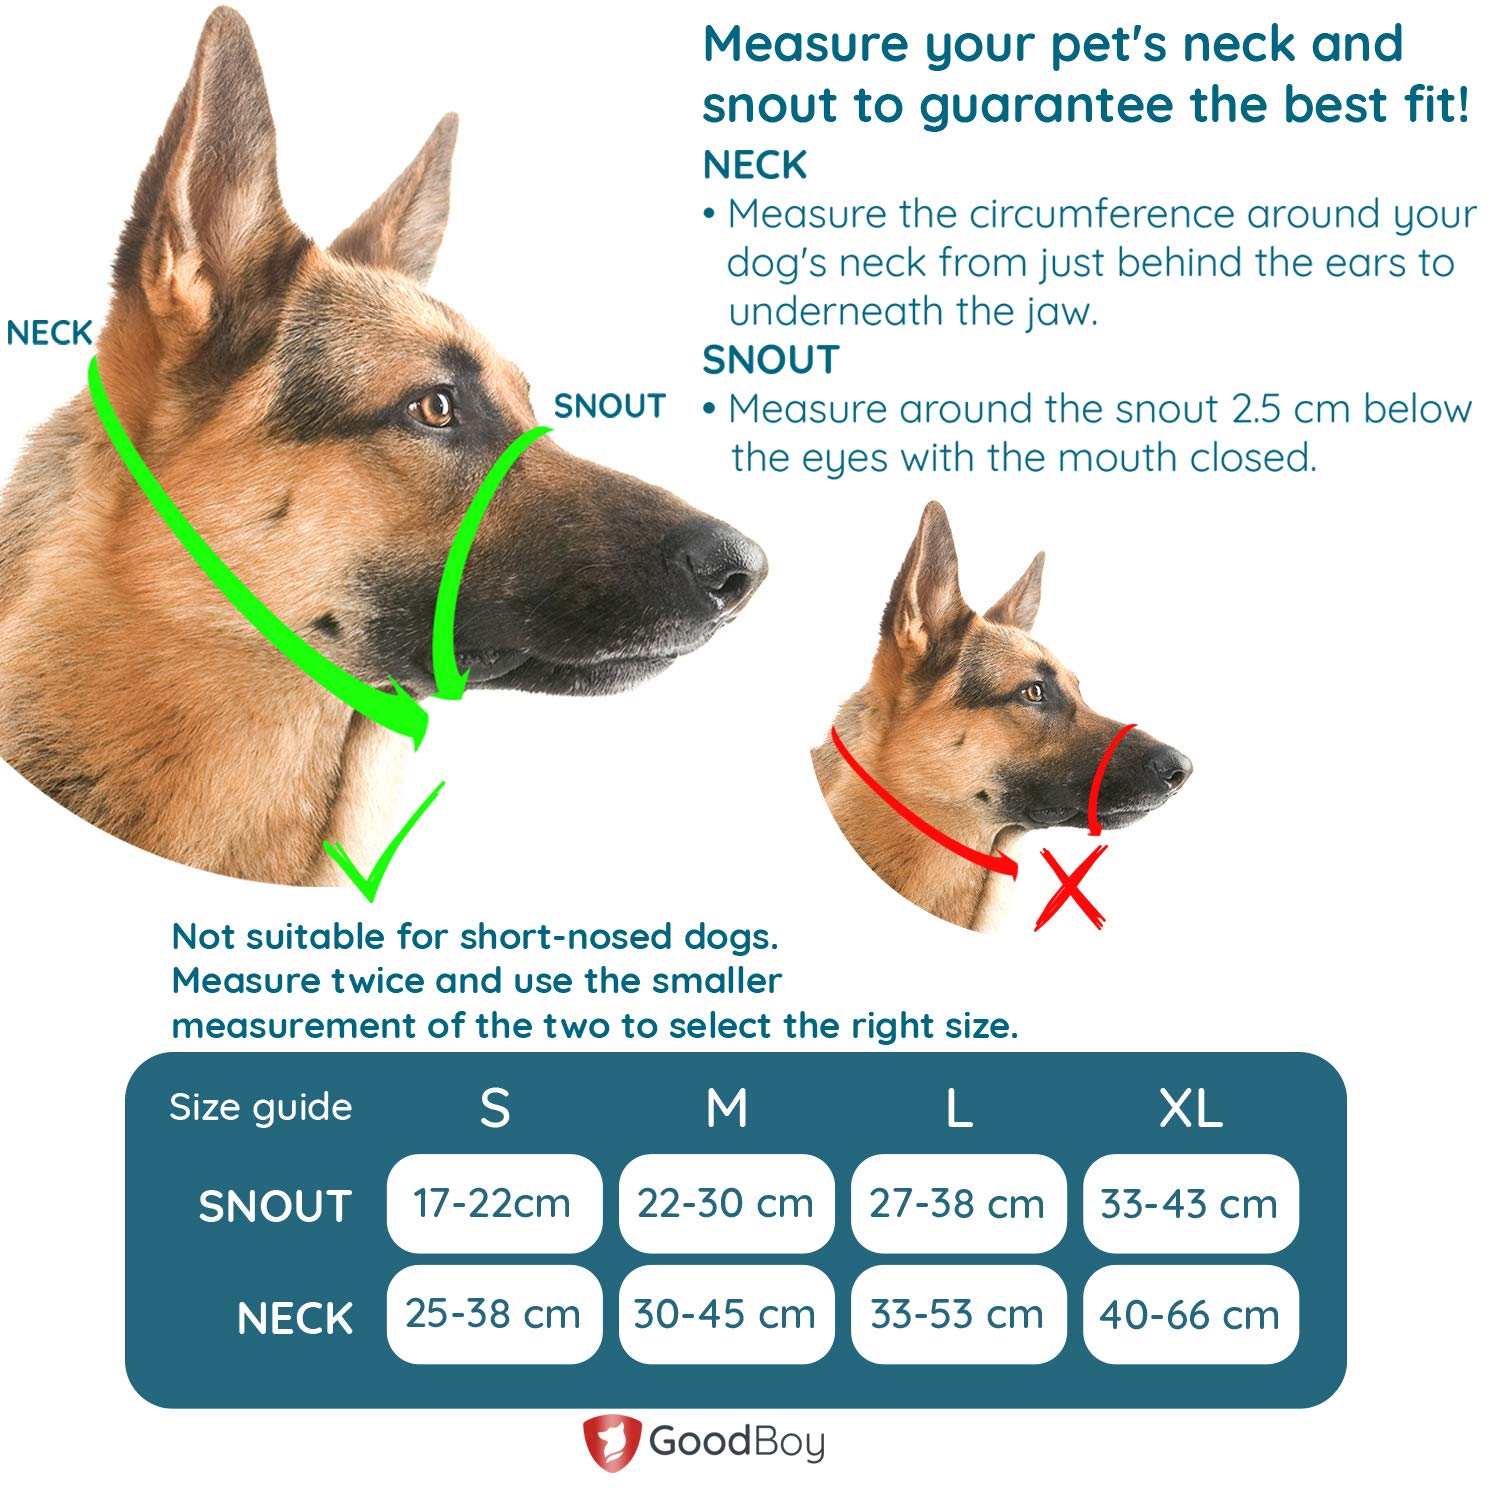 Corner Guards for Dogs: How to Protect Your Home From Nose to Tail Chewing